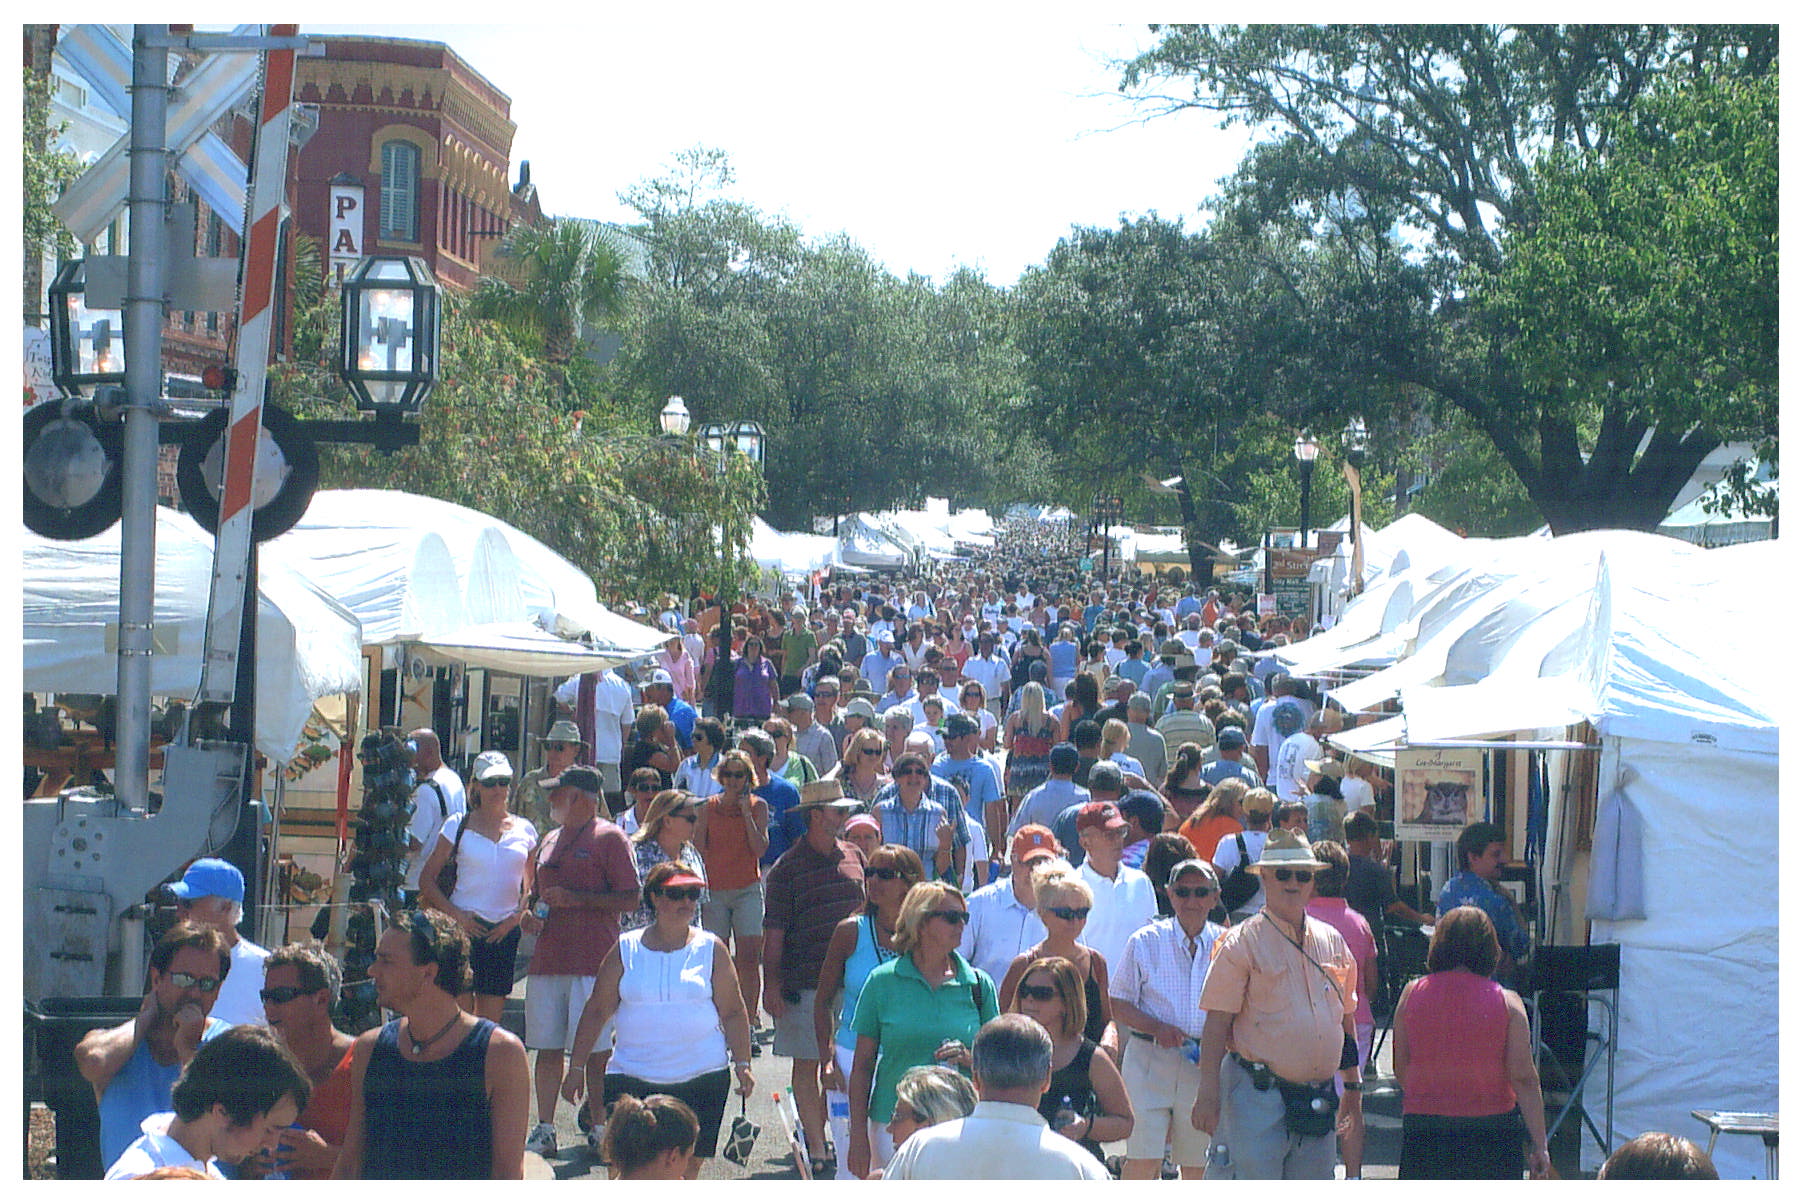 The annual Isle of Eight Flags Shrimp Festival takes place in the downtown Fernandina Beach Historic District